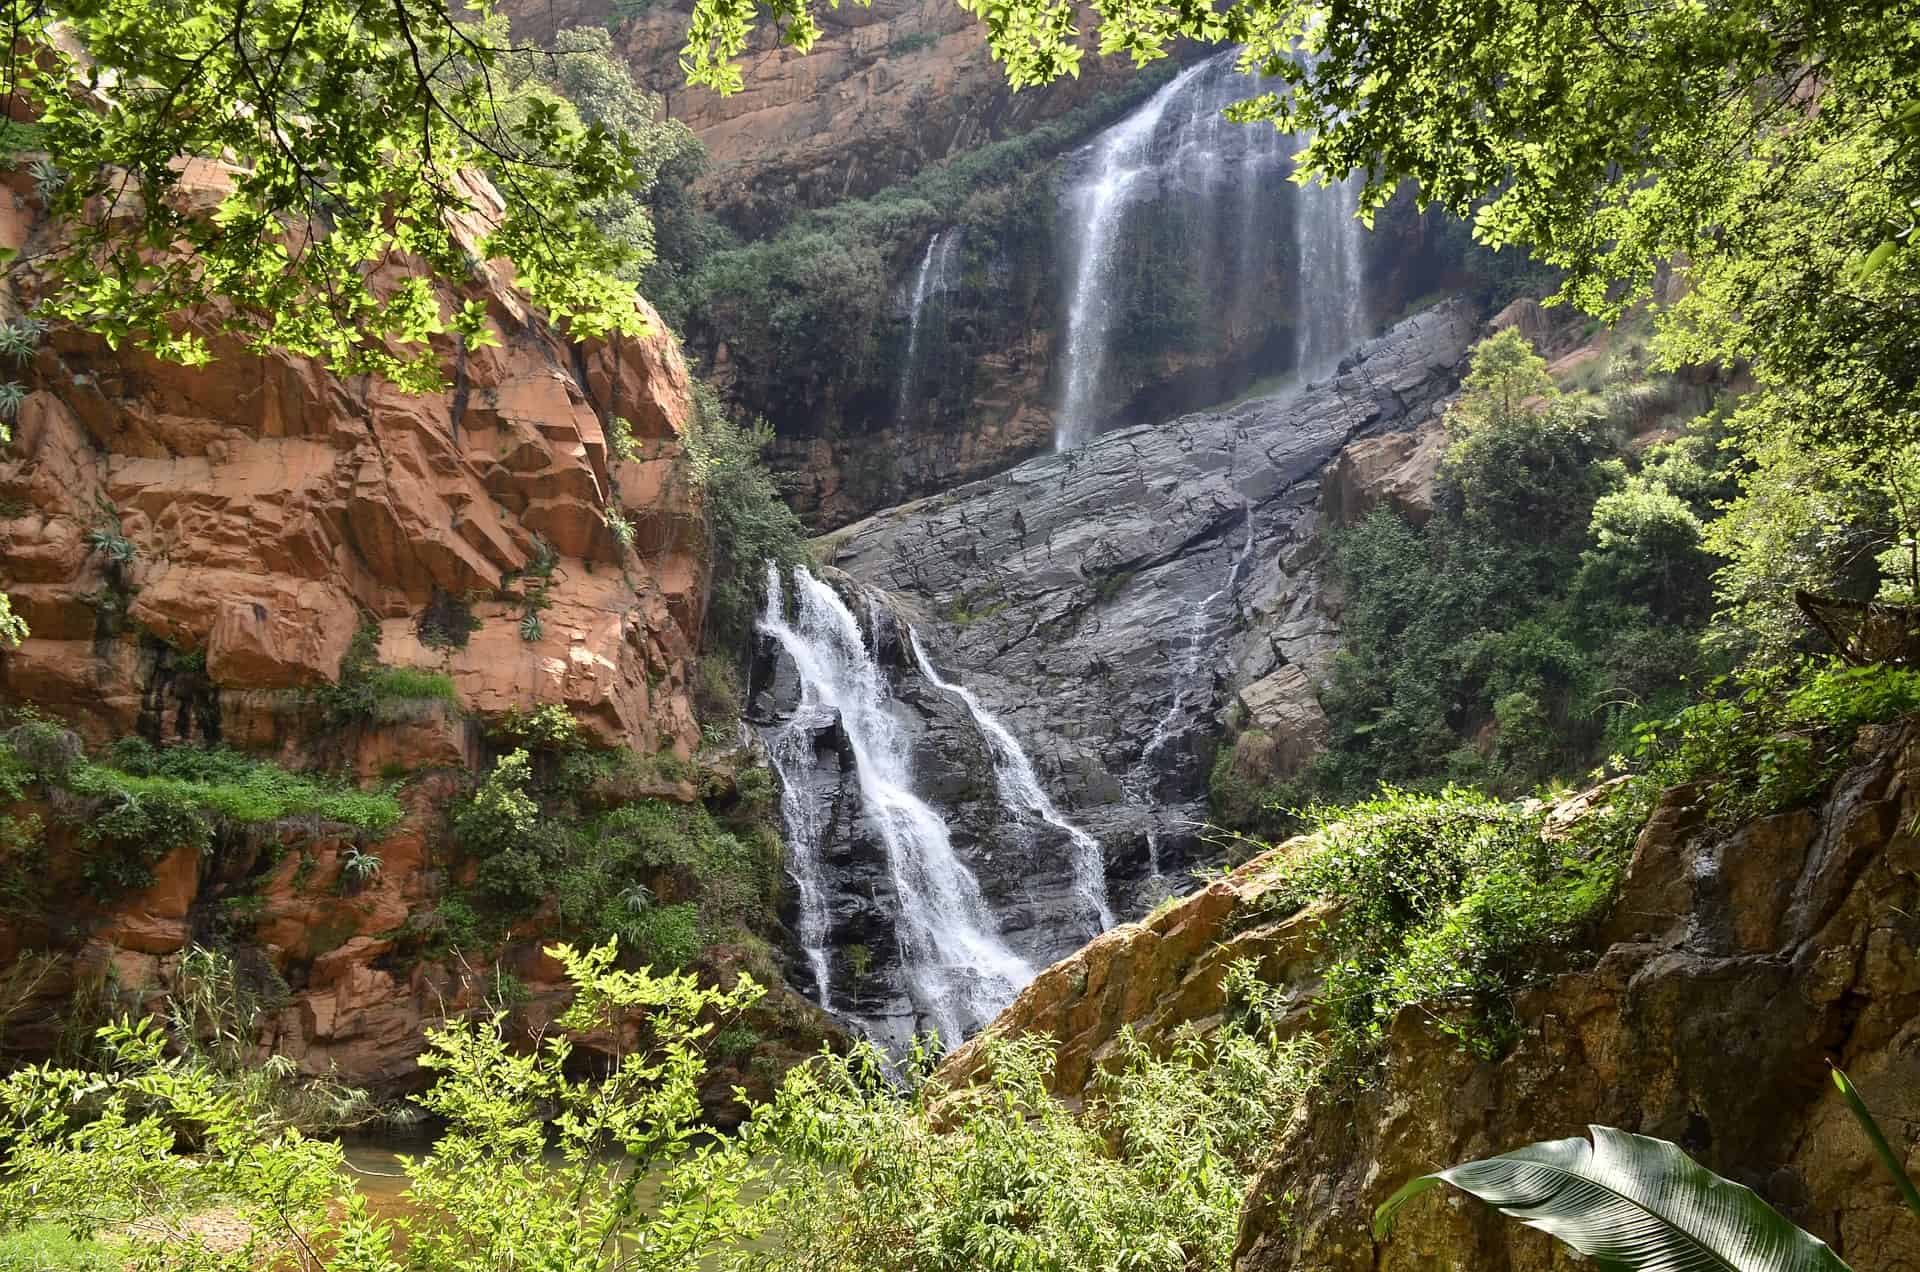 Best things to do in Johannesburg - Witpoortjie Waterfall at Walter Sisulu Botanical Gardens by Msalili on Pixabay